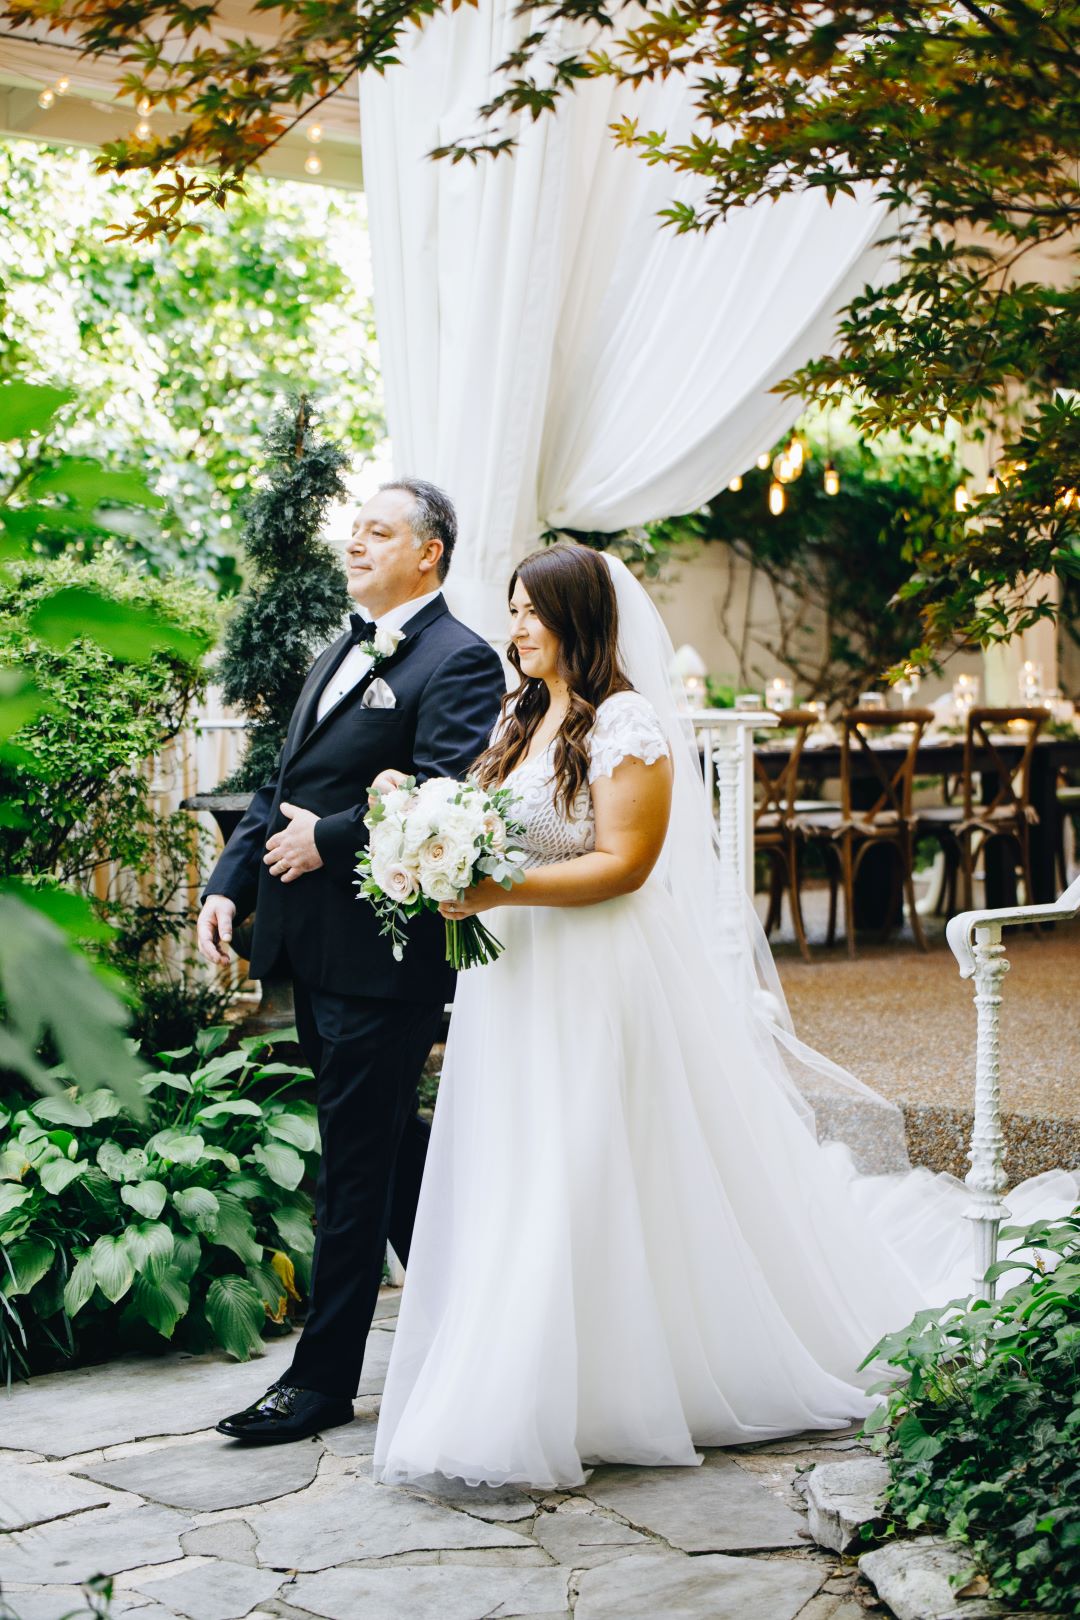 Bride walking down the aisle with her father at earthy summer garden wedding in September, neutrals & greenery